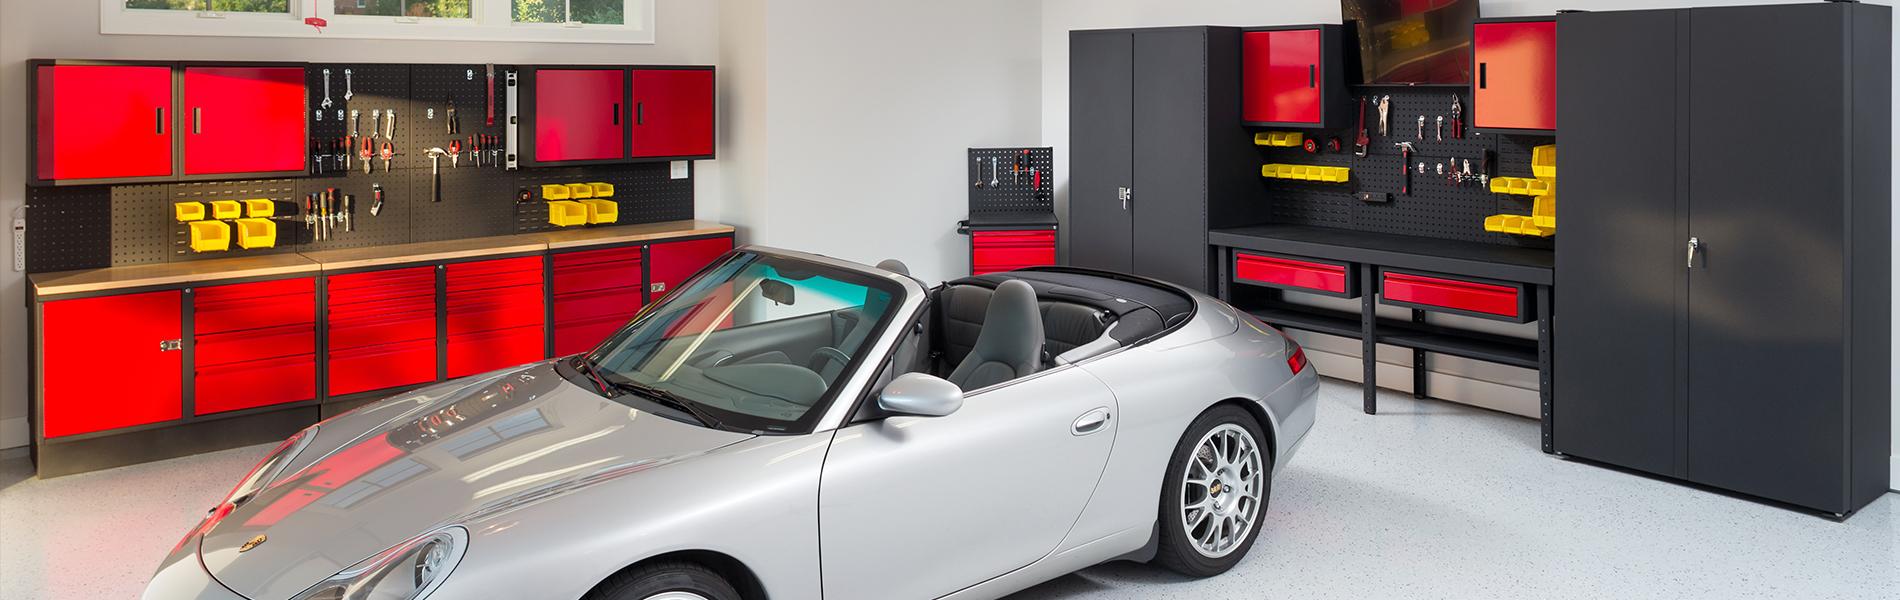 Collectors Edition Garage red cabinets with gray Porsche